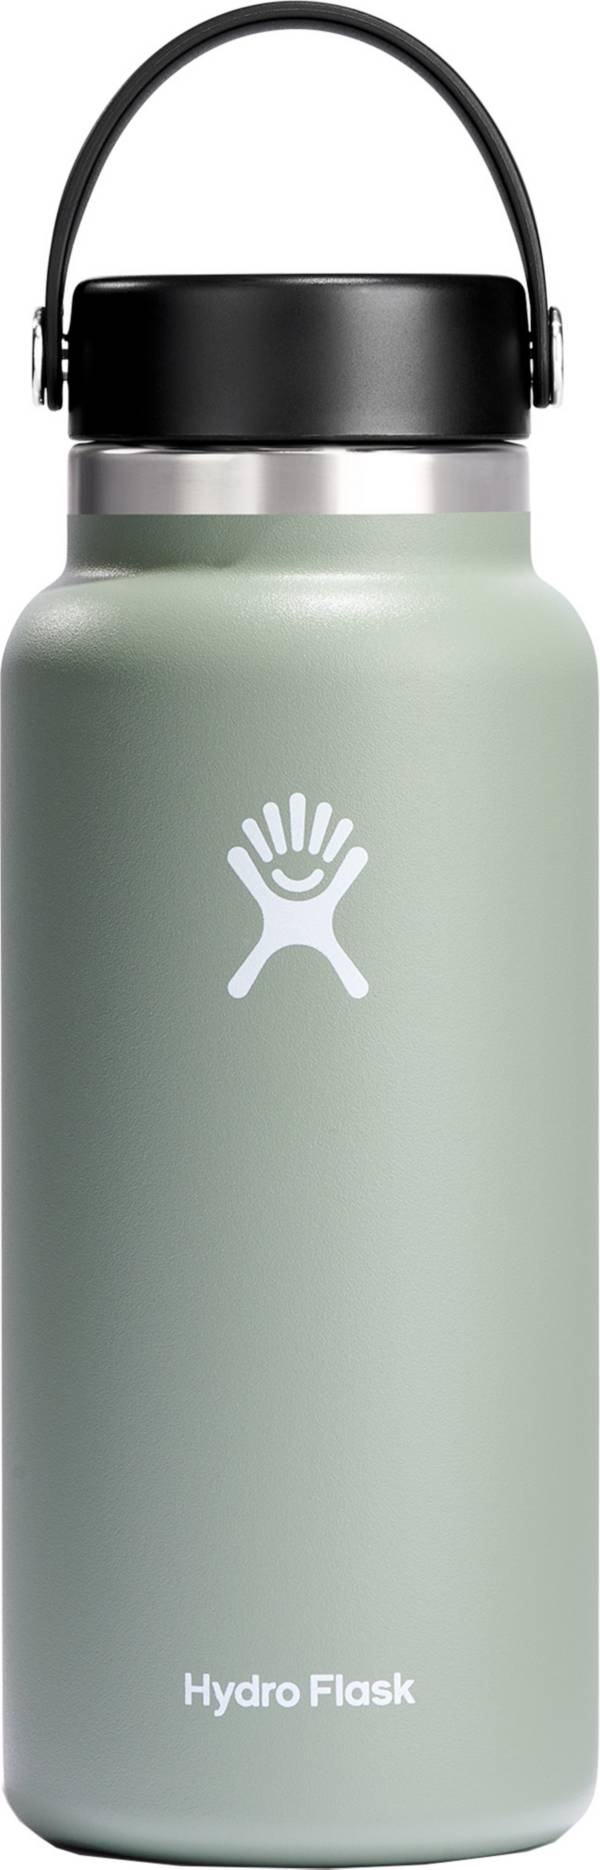 Hydro Flask 32 oz. Wide Mouth Bottle product image